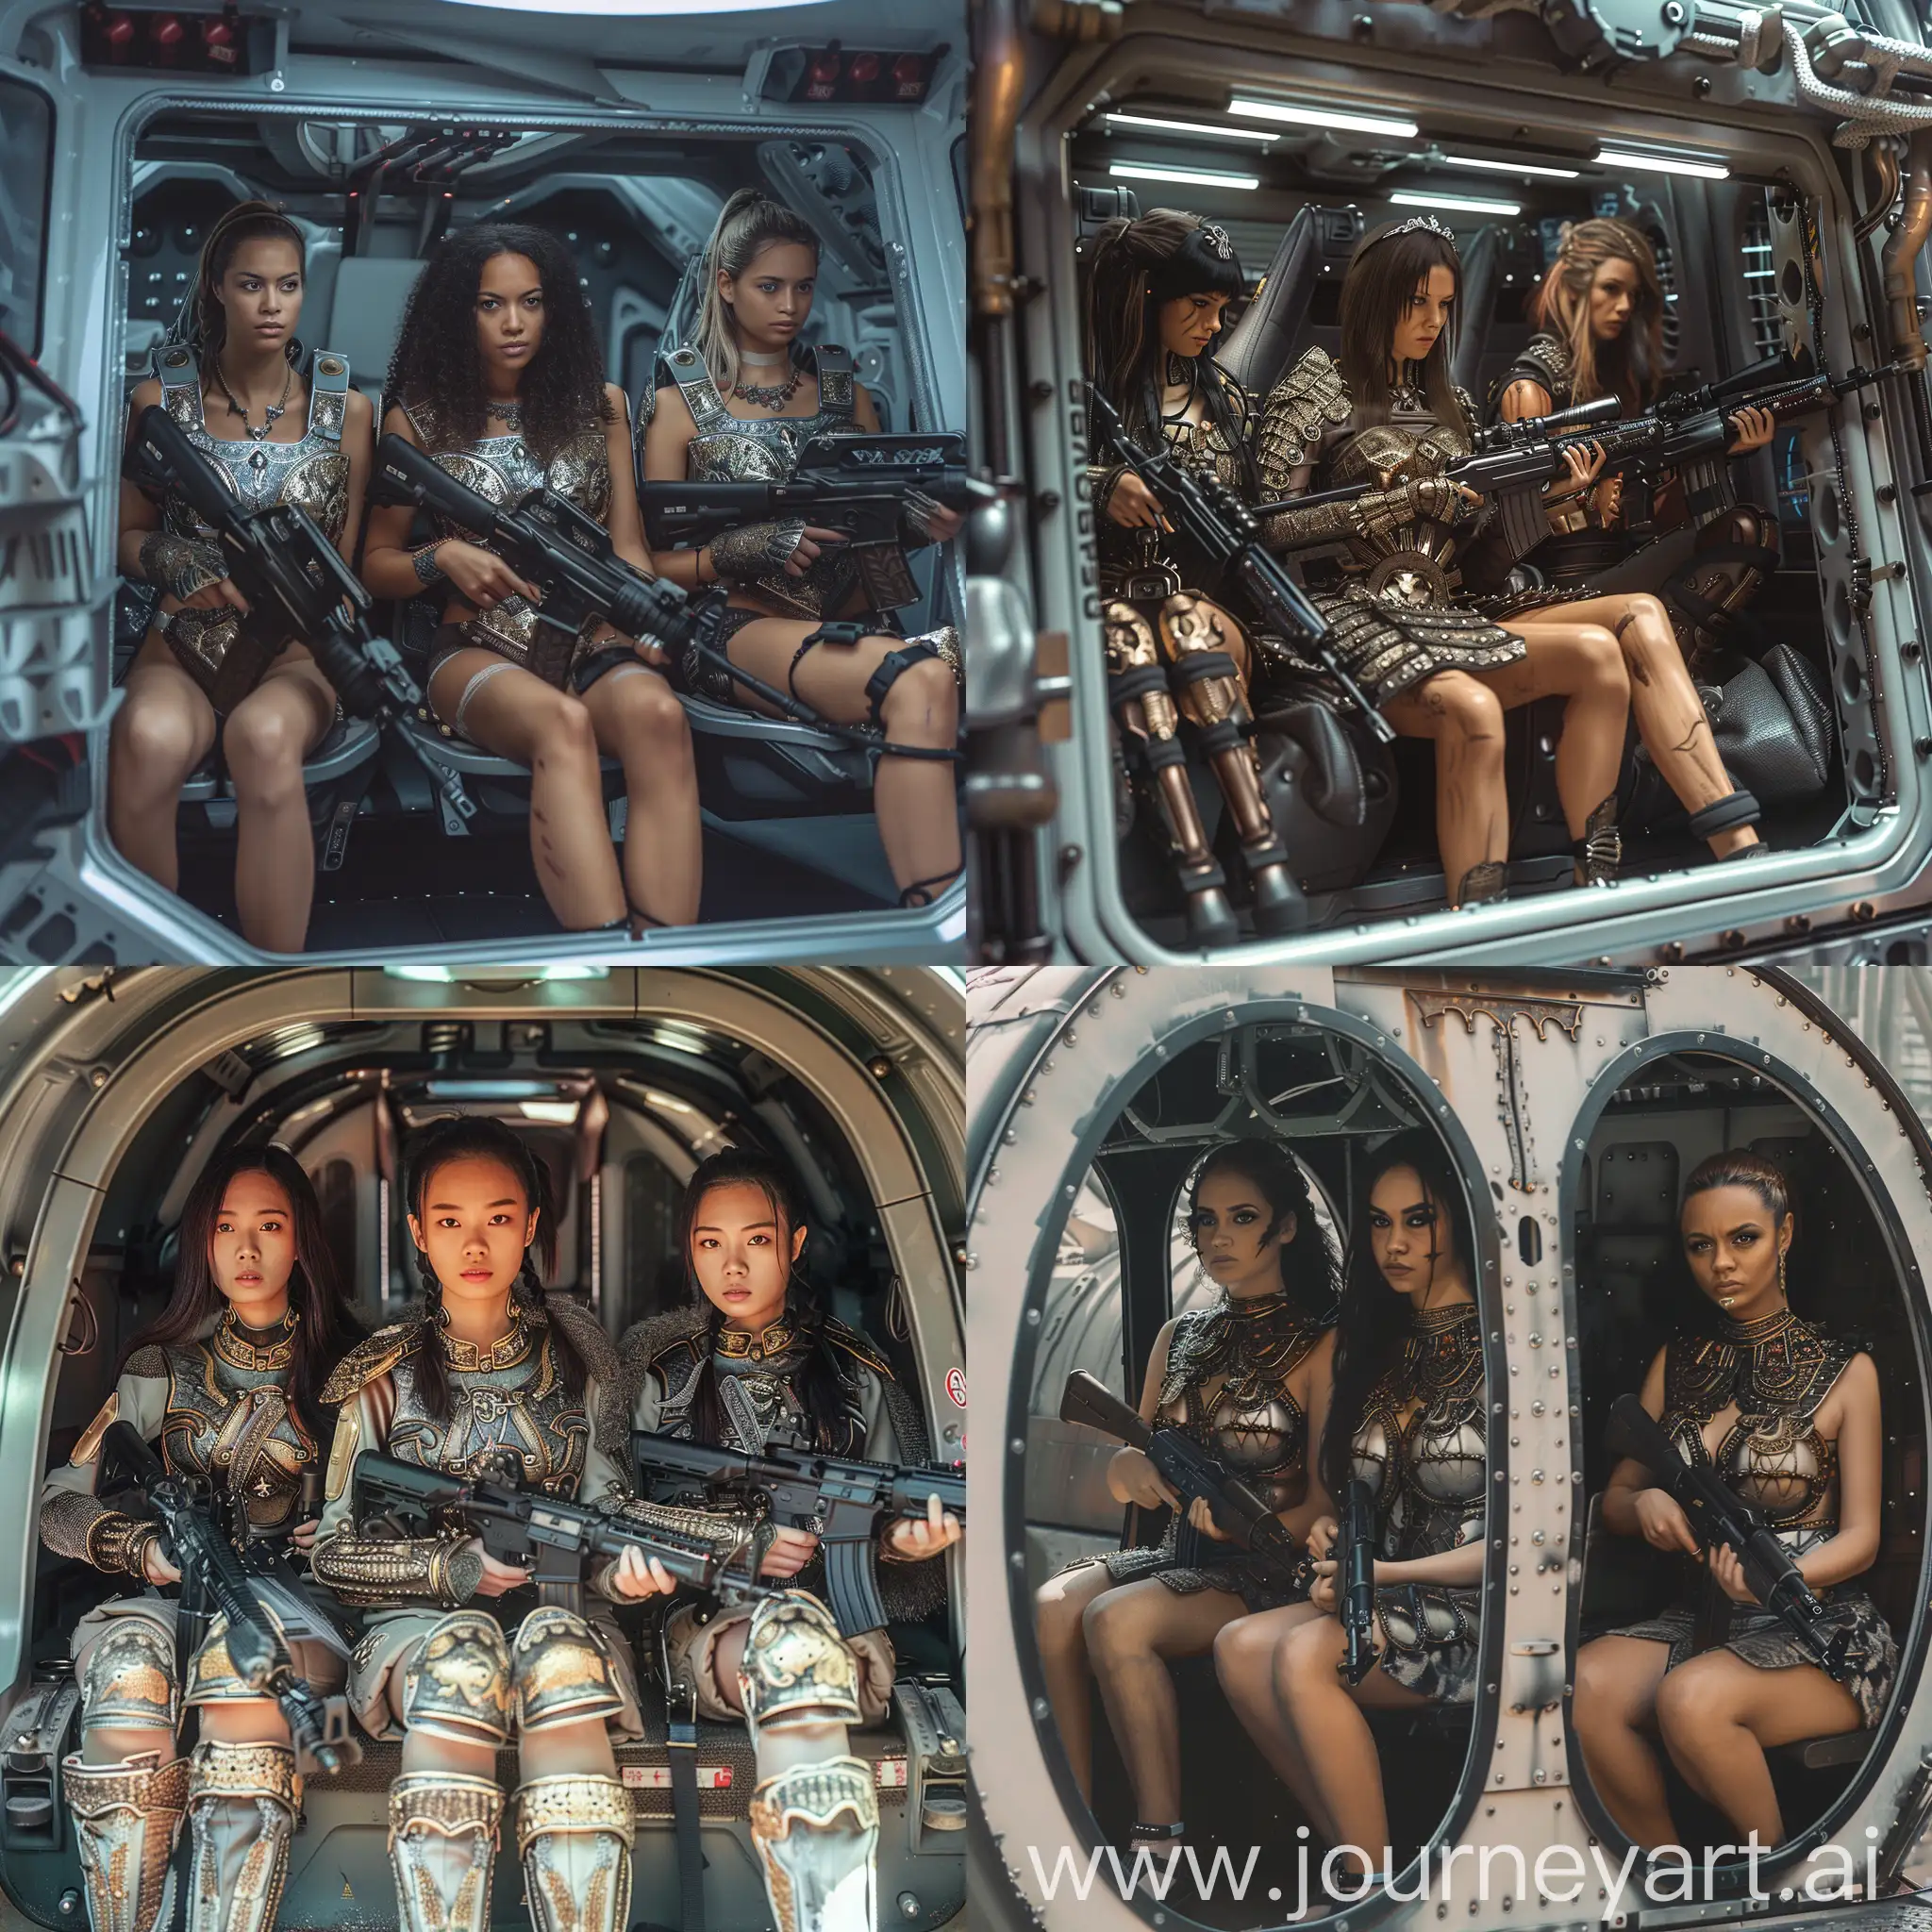 3 silent and young female, modern warriors wearing decorative plate armour, sitting inside futuristic mecanical transporter, holding automatic rifles, waiting for the battle to happen